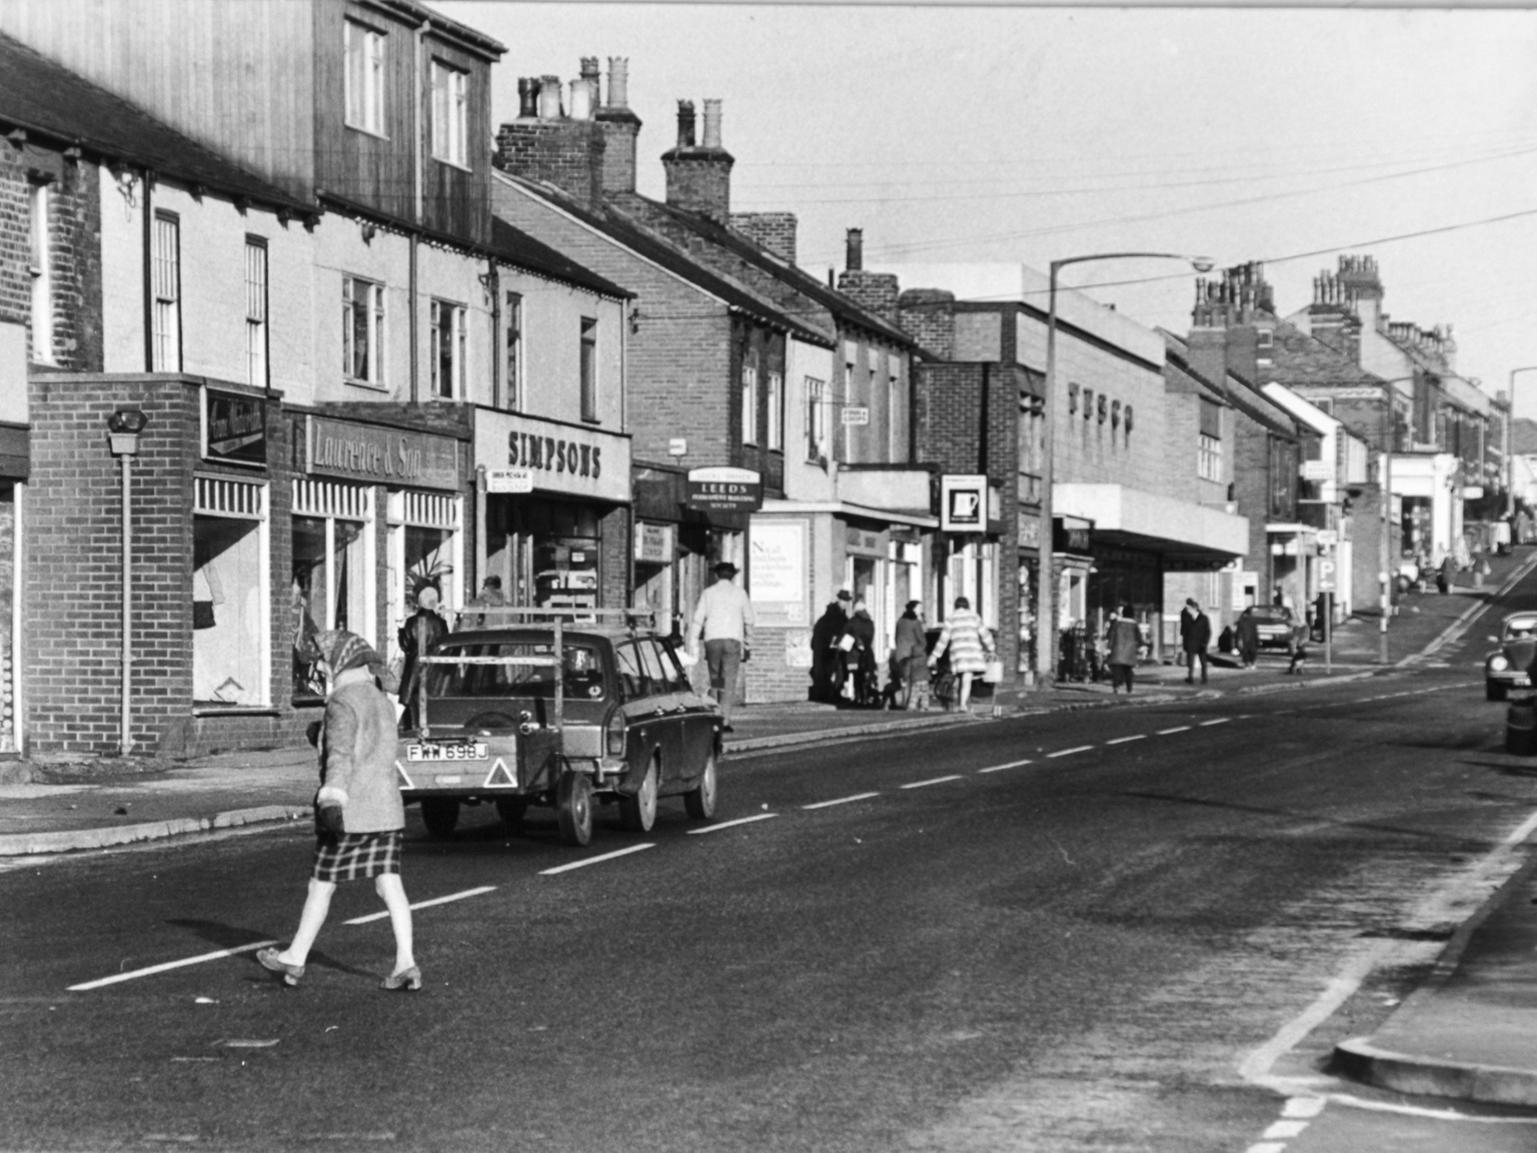 A view of Main Street in Garforth.